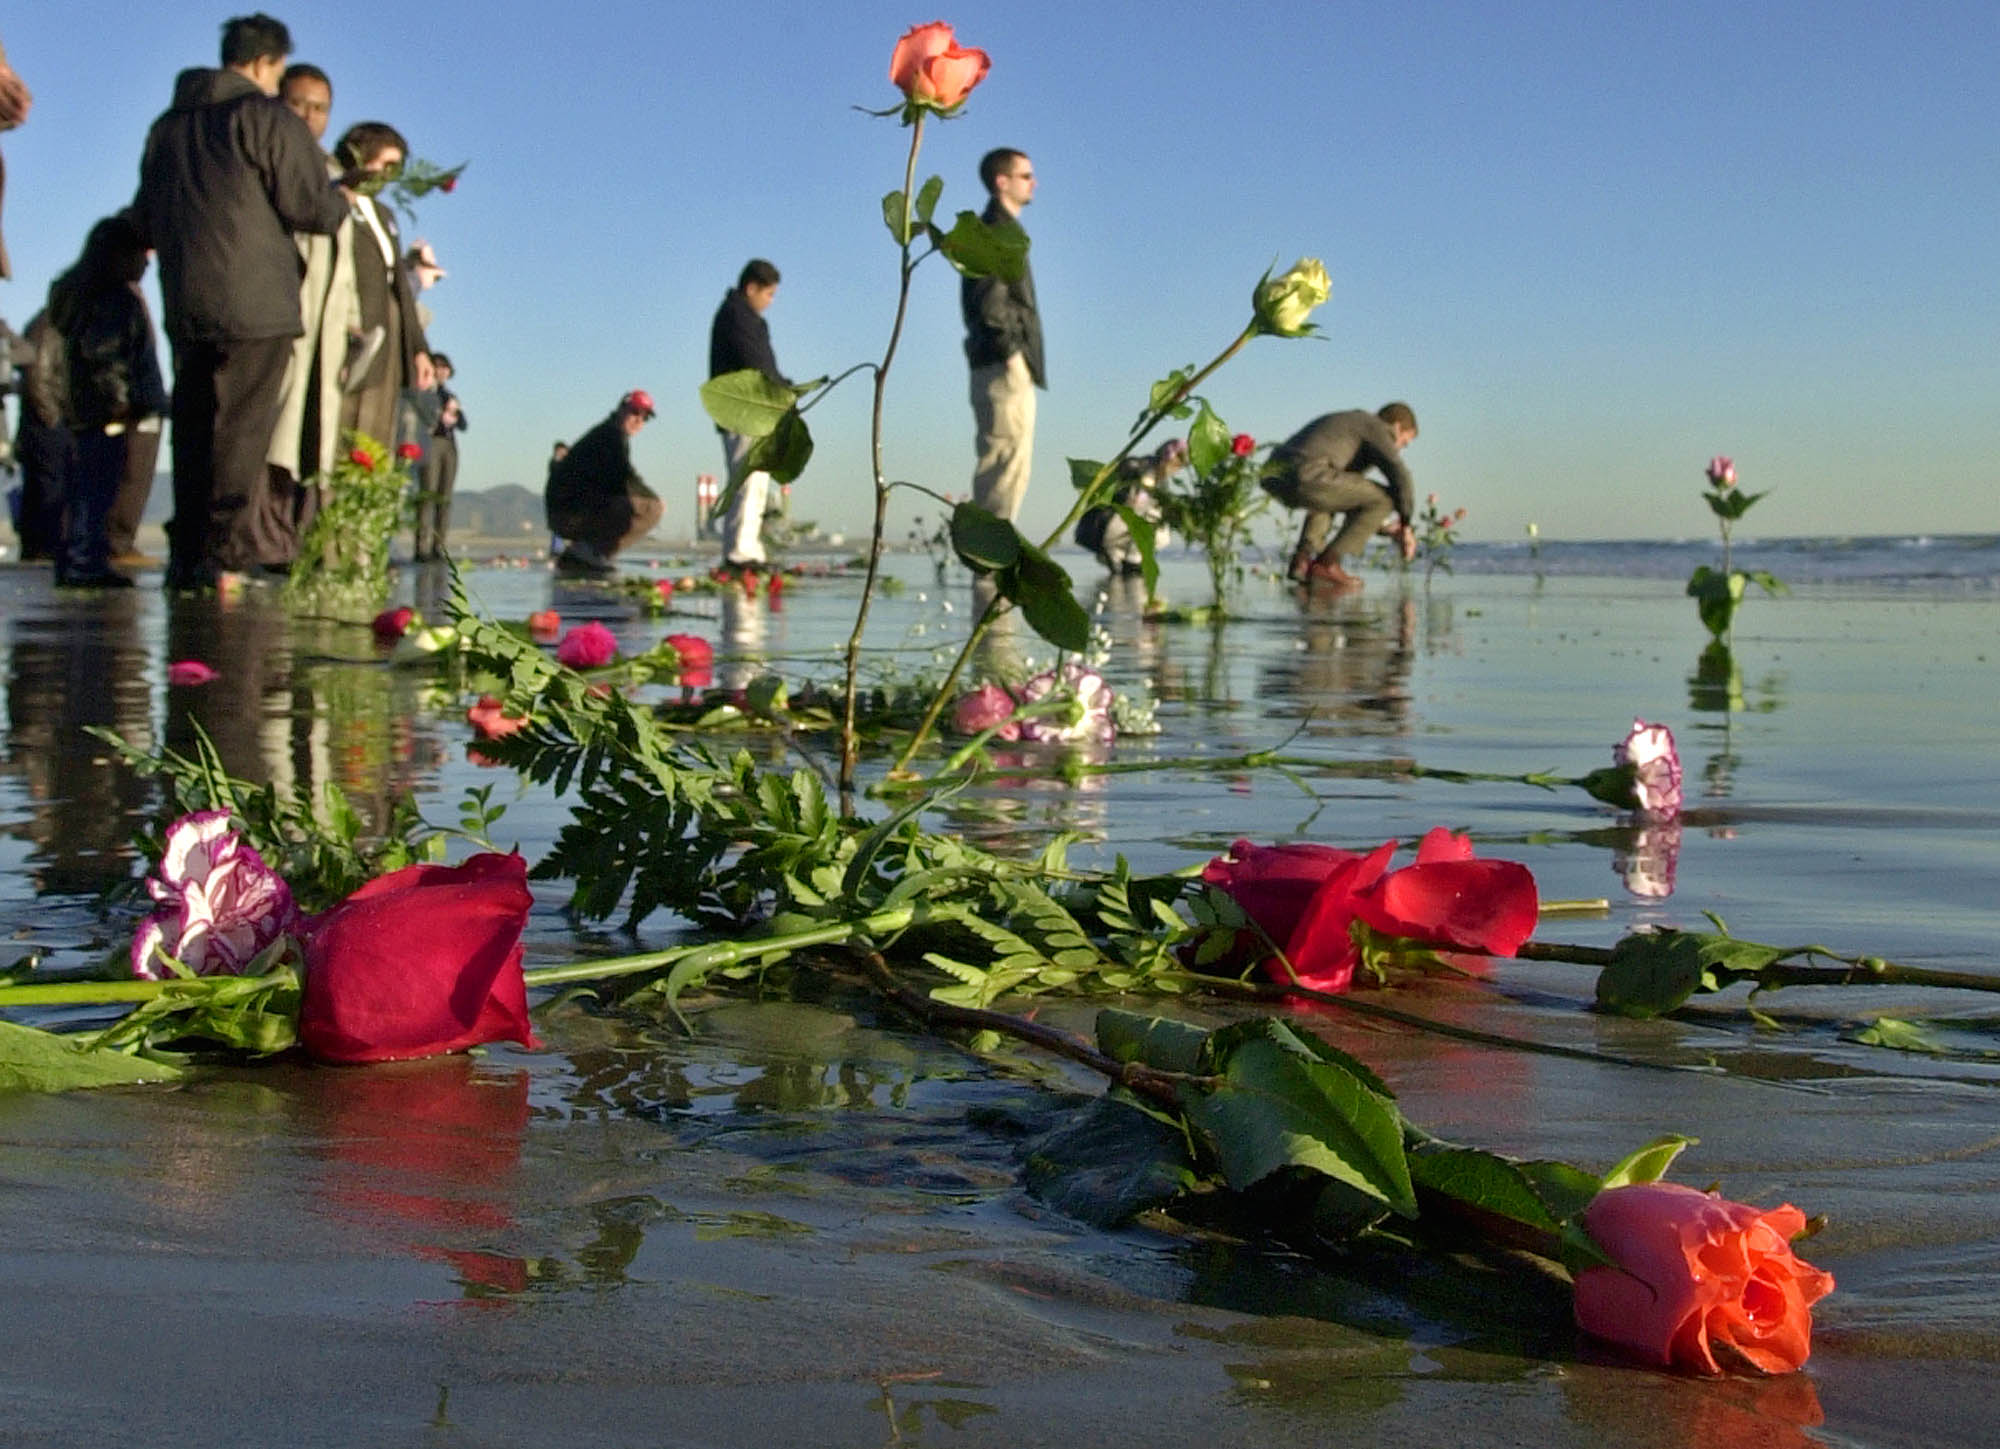 Waves lap over roses left in the surf by family members of victims after ceremonies to dedicate a monument to remember the victims of Alaska Airlines Flight 261, which plunged into the sea about eight miles offshore two years ago, at Port Hueneme Beach Park Thursday, Jan. 31, 2002, in Port Hueneme, Calif.  The crash took 88 lives when the jetliner crashed at 4:21 p.m. on Jan. 31, 2000.